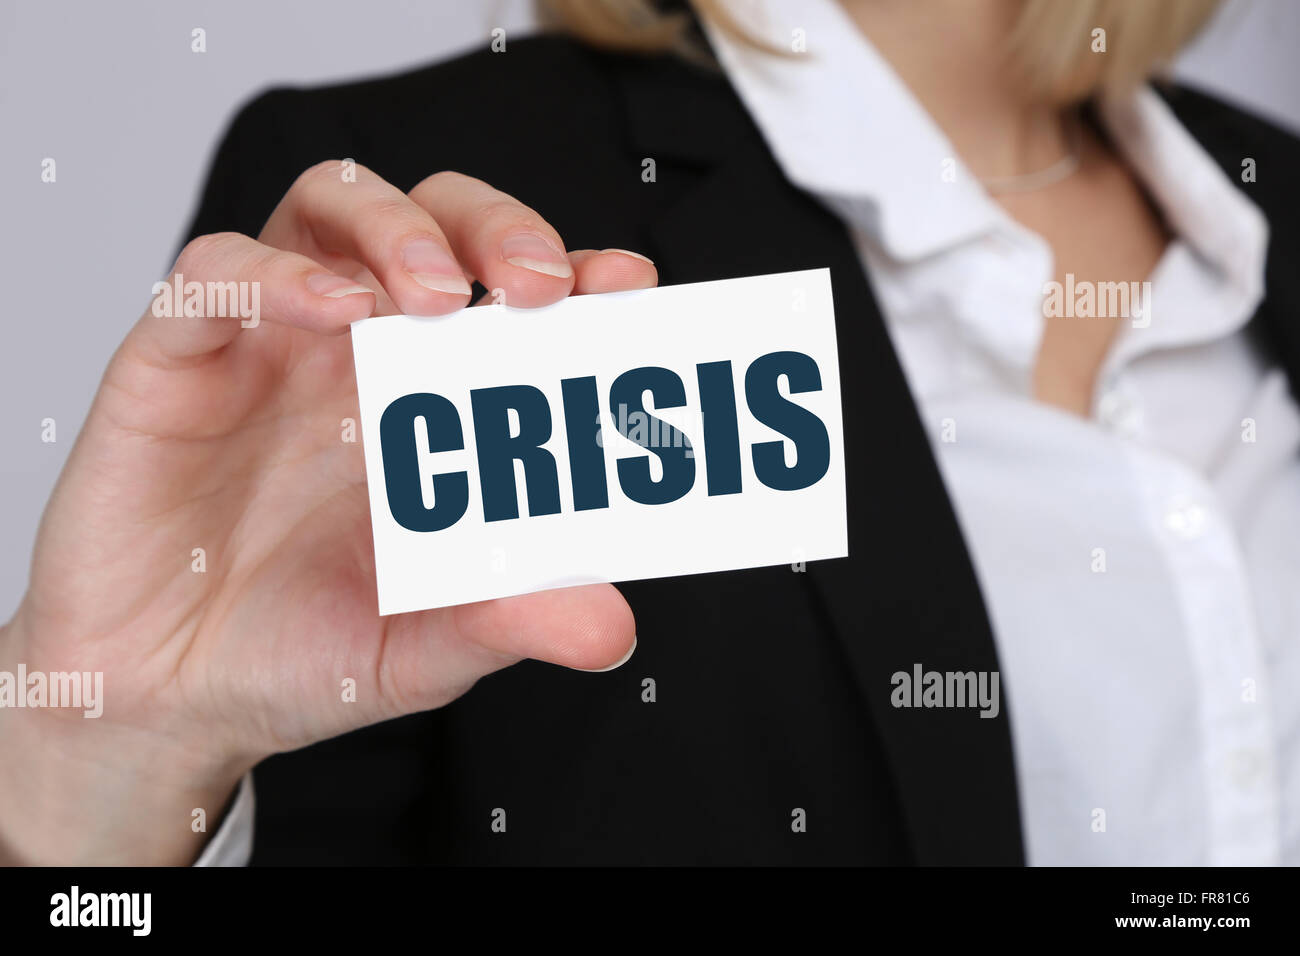 Crisis financial banking management depts business concept insolvency Stock Photo